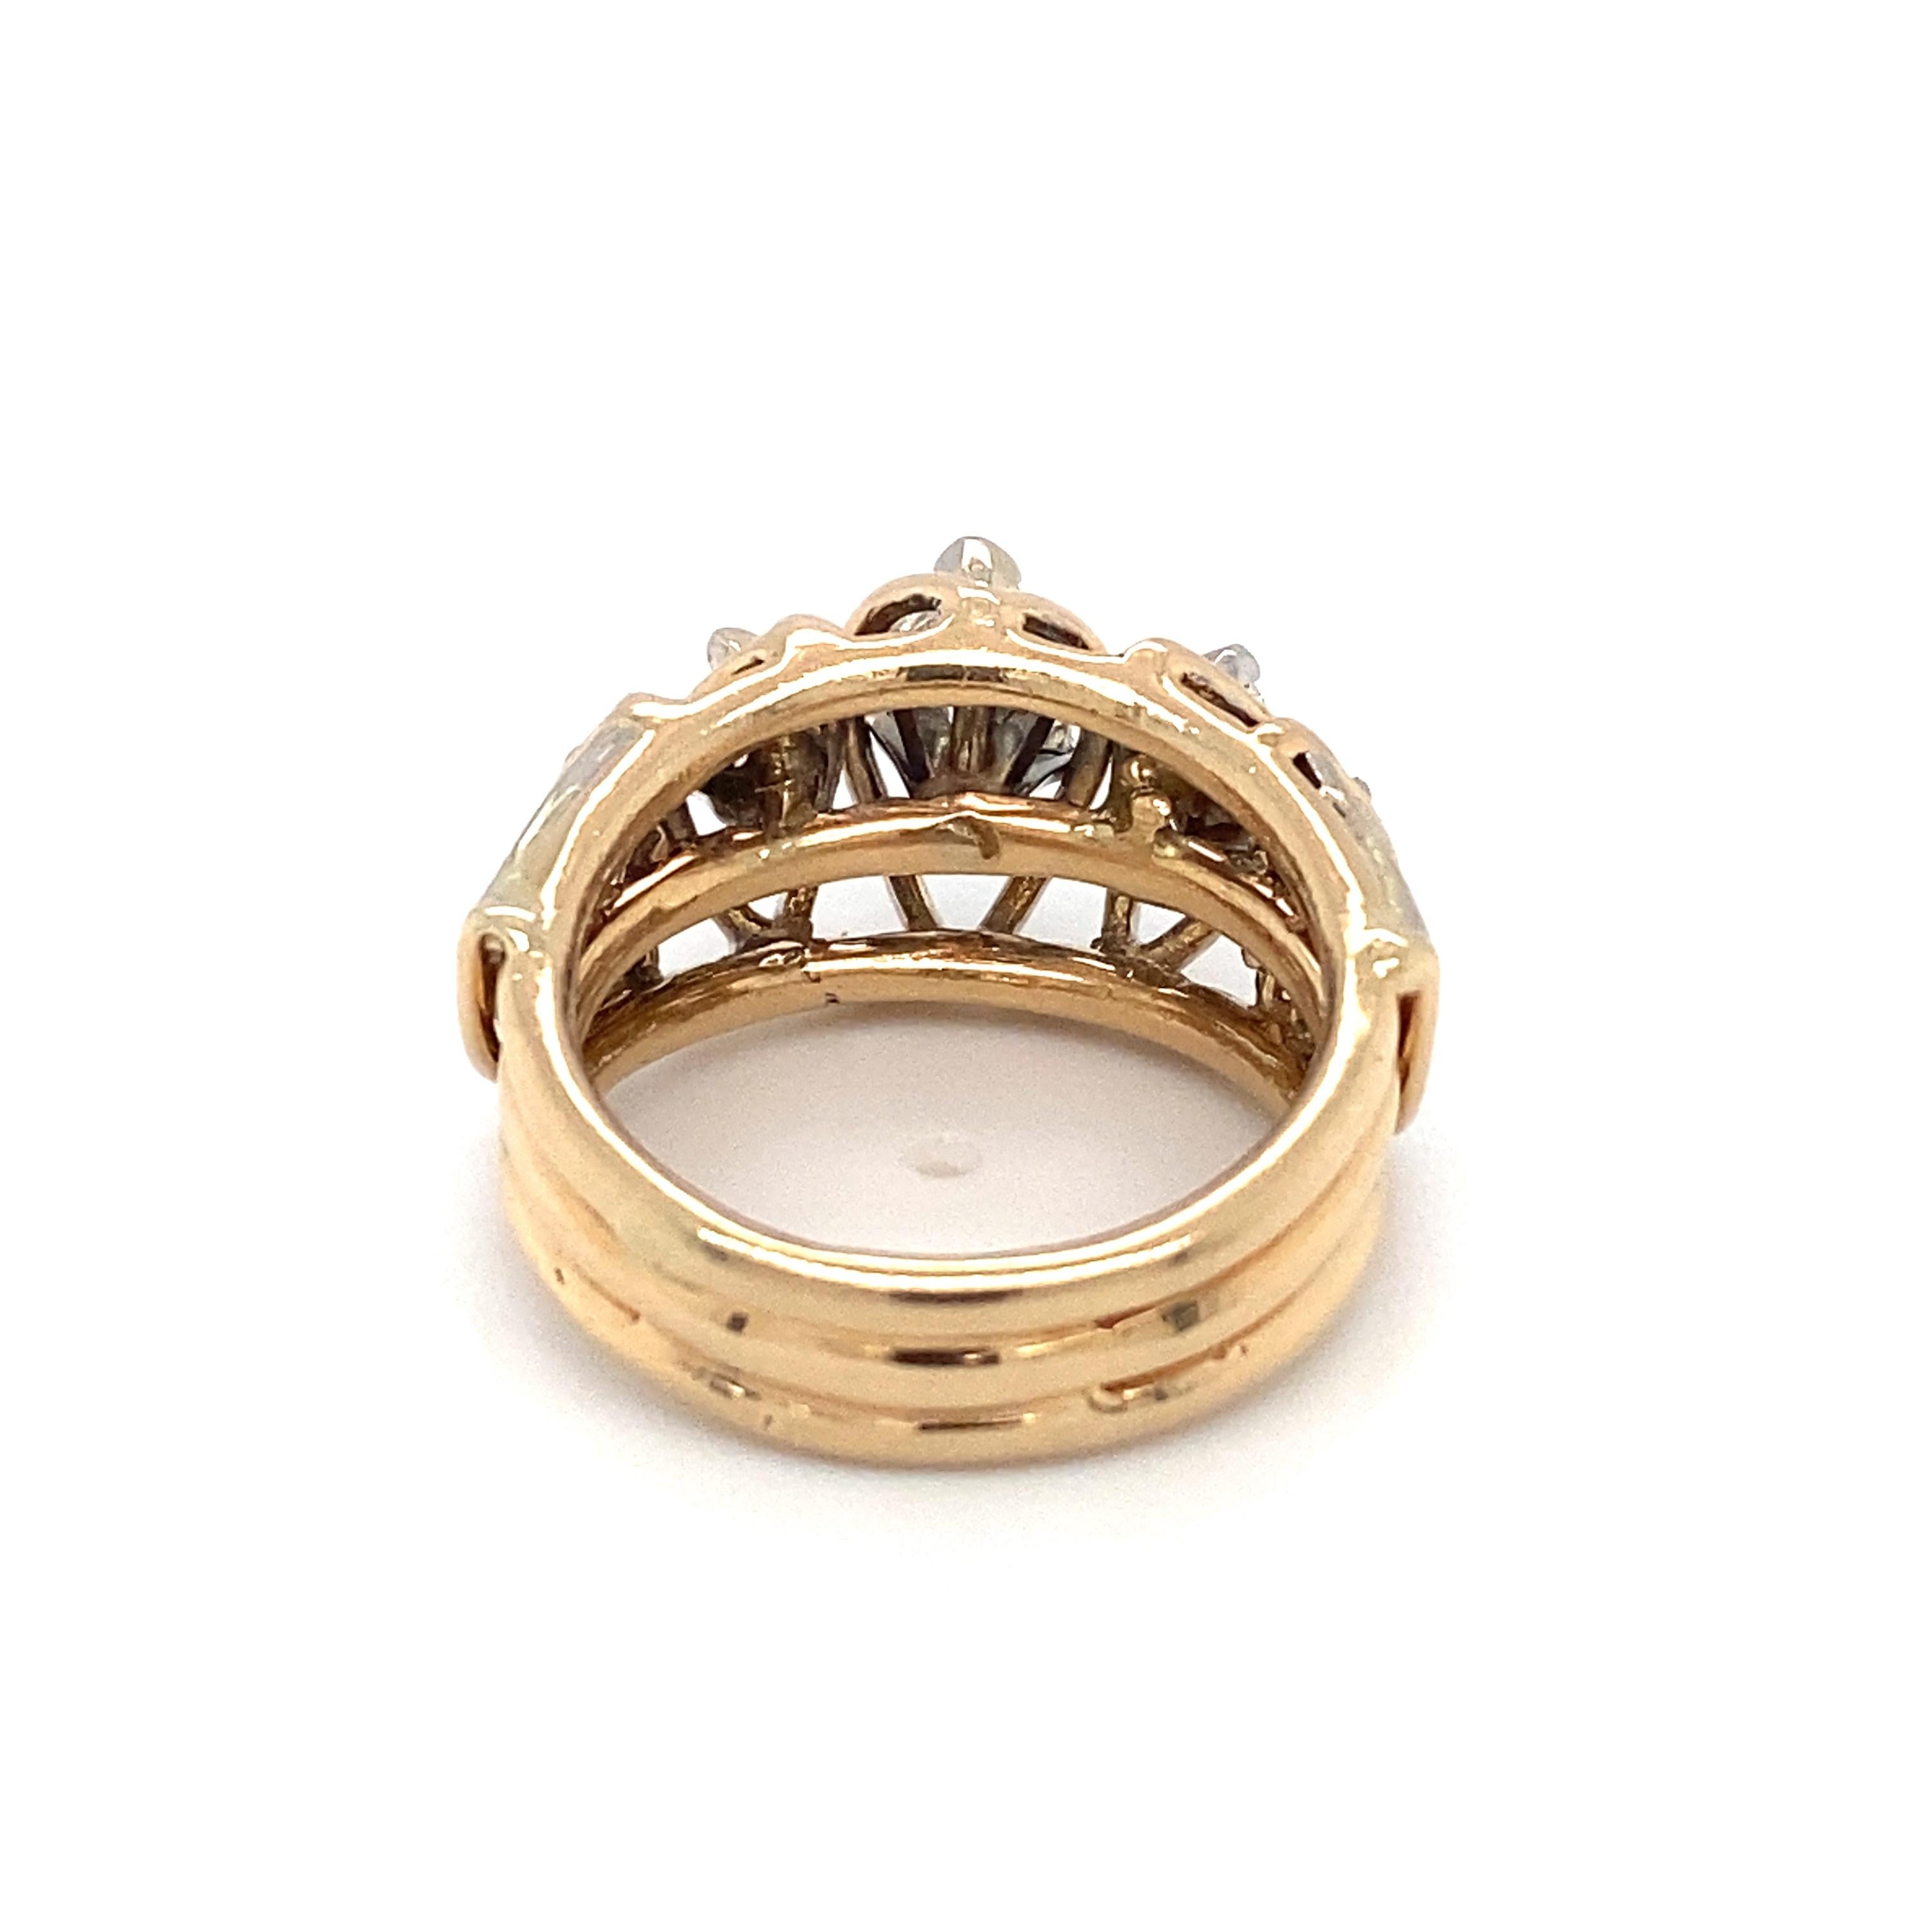 Item Details: This retro style ornate ring from the 1970s features marquise and round diamonds in a crossover design.

Circa: 1970s
Metal Type: 14 Karat Yellow Gold
Weight: 10.9 grams
Size: US 7.25, resizable

Diamond Details:

Carat: 1.60 carat